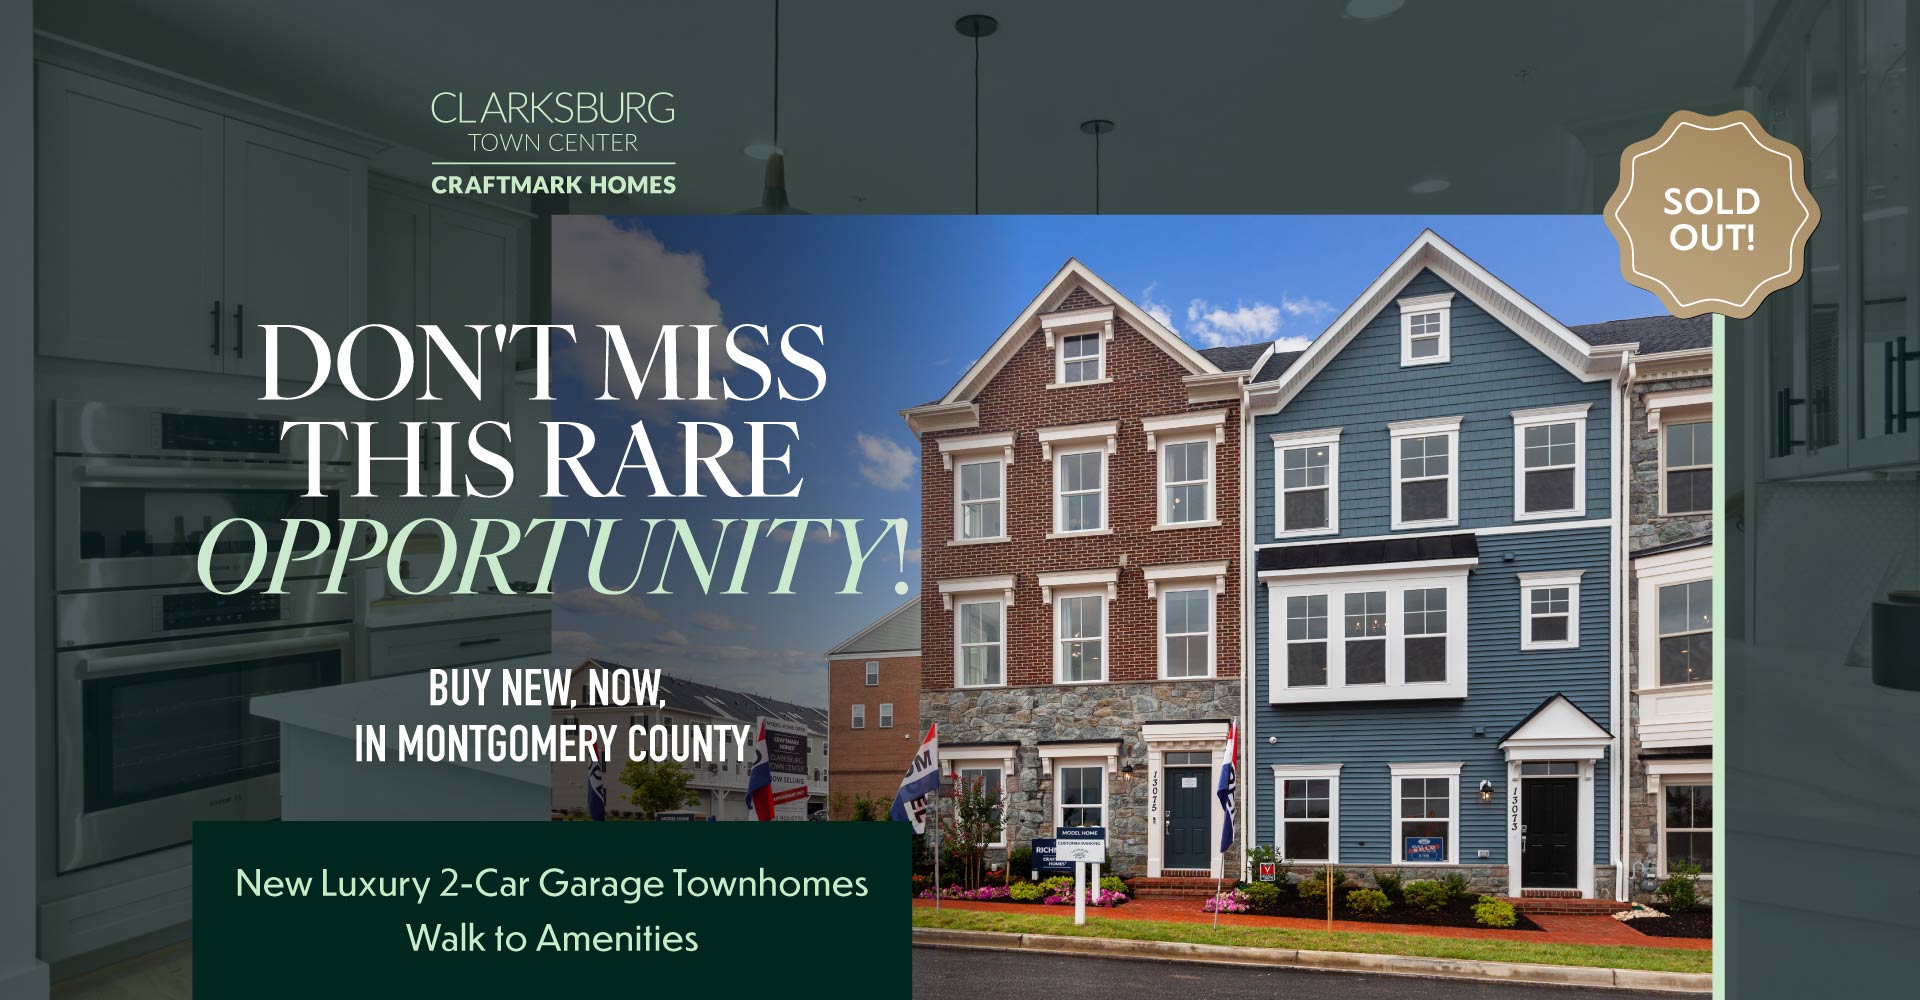 2-Car Garage Townhomes in Montgomery County, MD, Clarksburg Town Center by Craftmark Homes